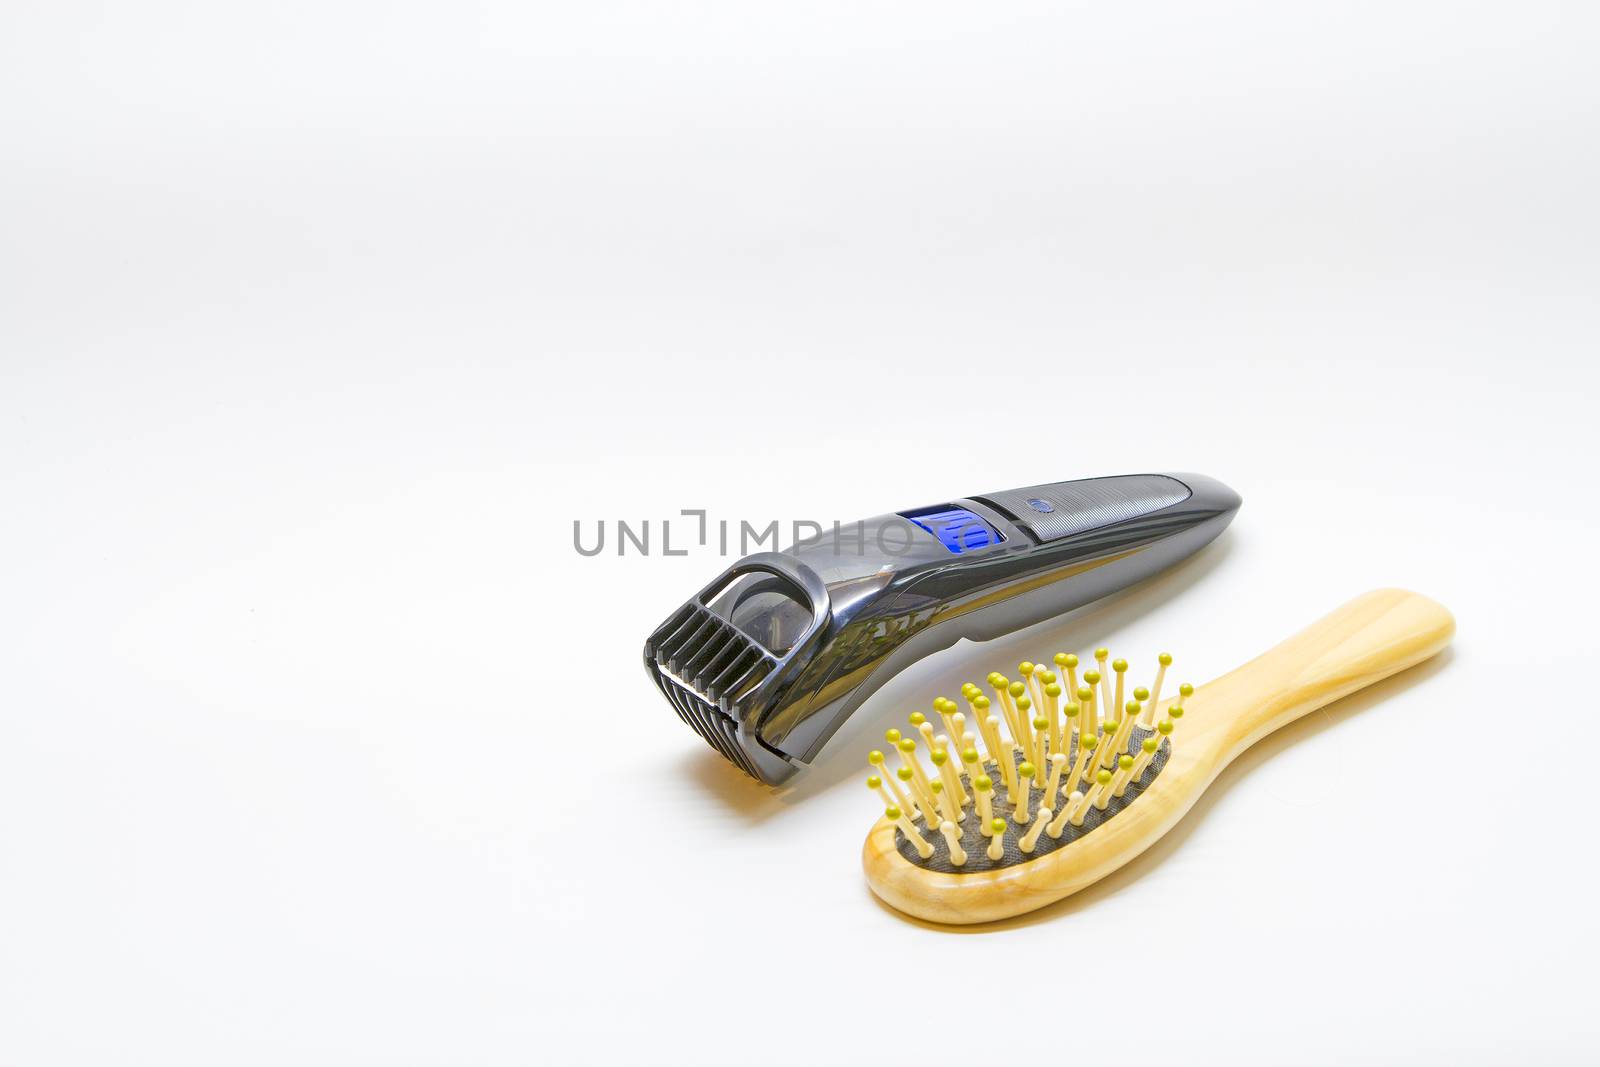 Hair brush comb with scraping hair and clipper on a white backgr by TakerWalker